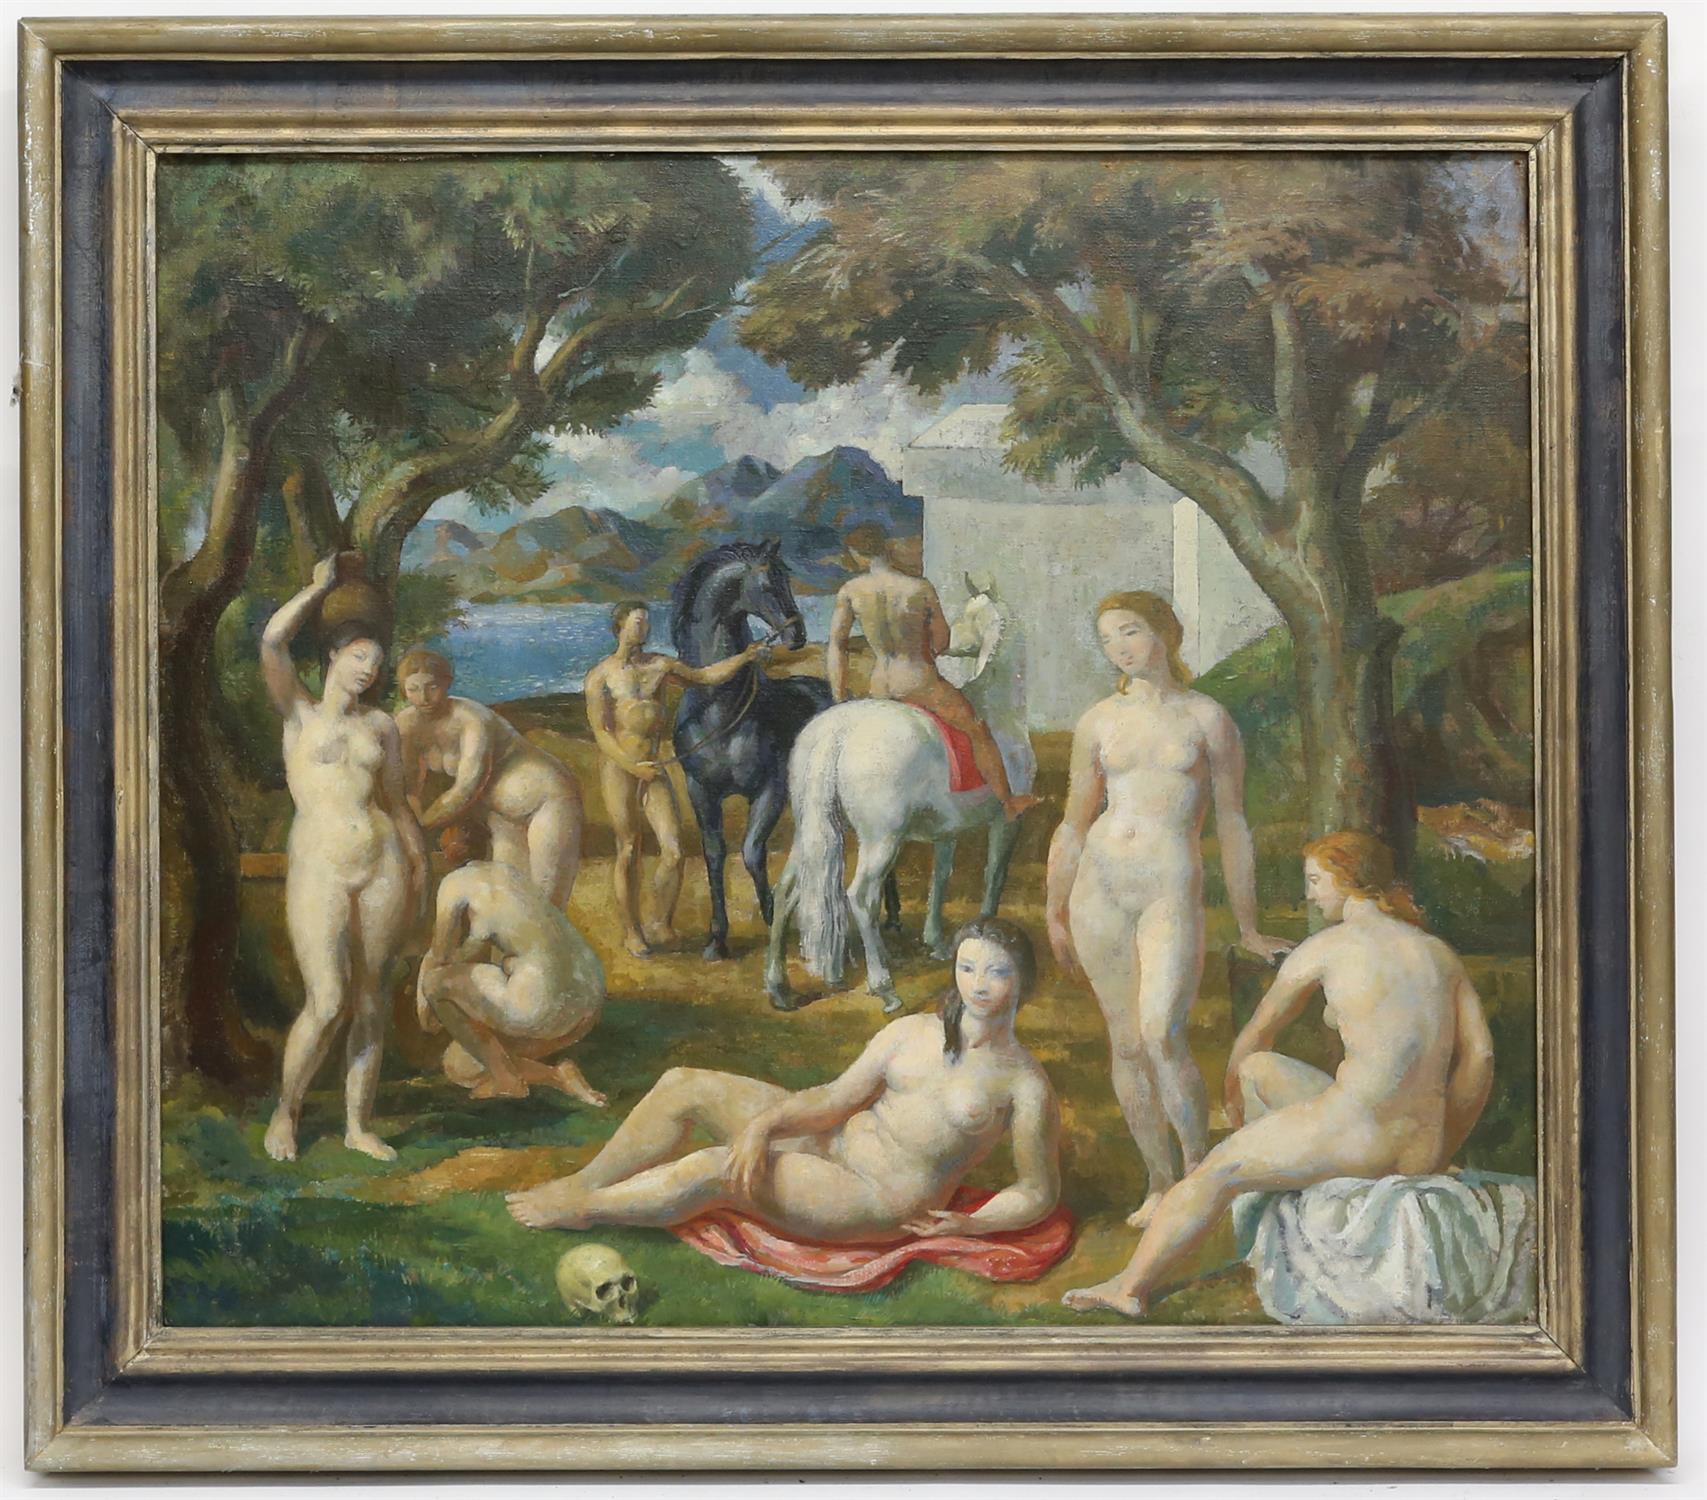 § Lionel Ellis.(1903-1988) Classical Scene with Nudes and Horses in a Coastal Garden. Oil on canvas, - Image 2 of 3